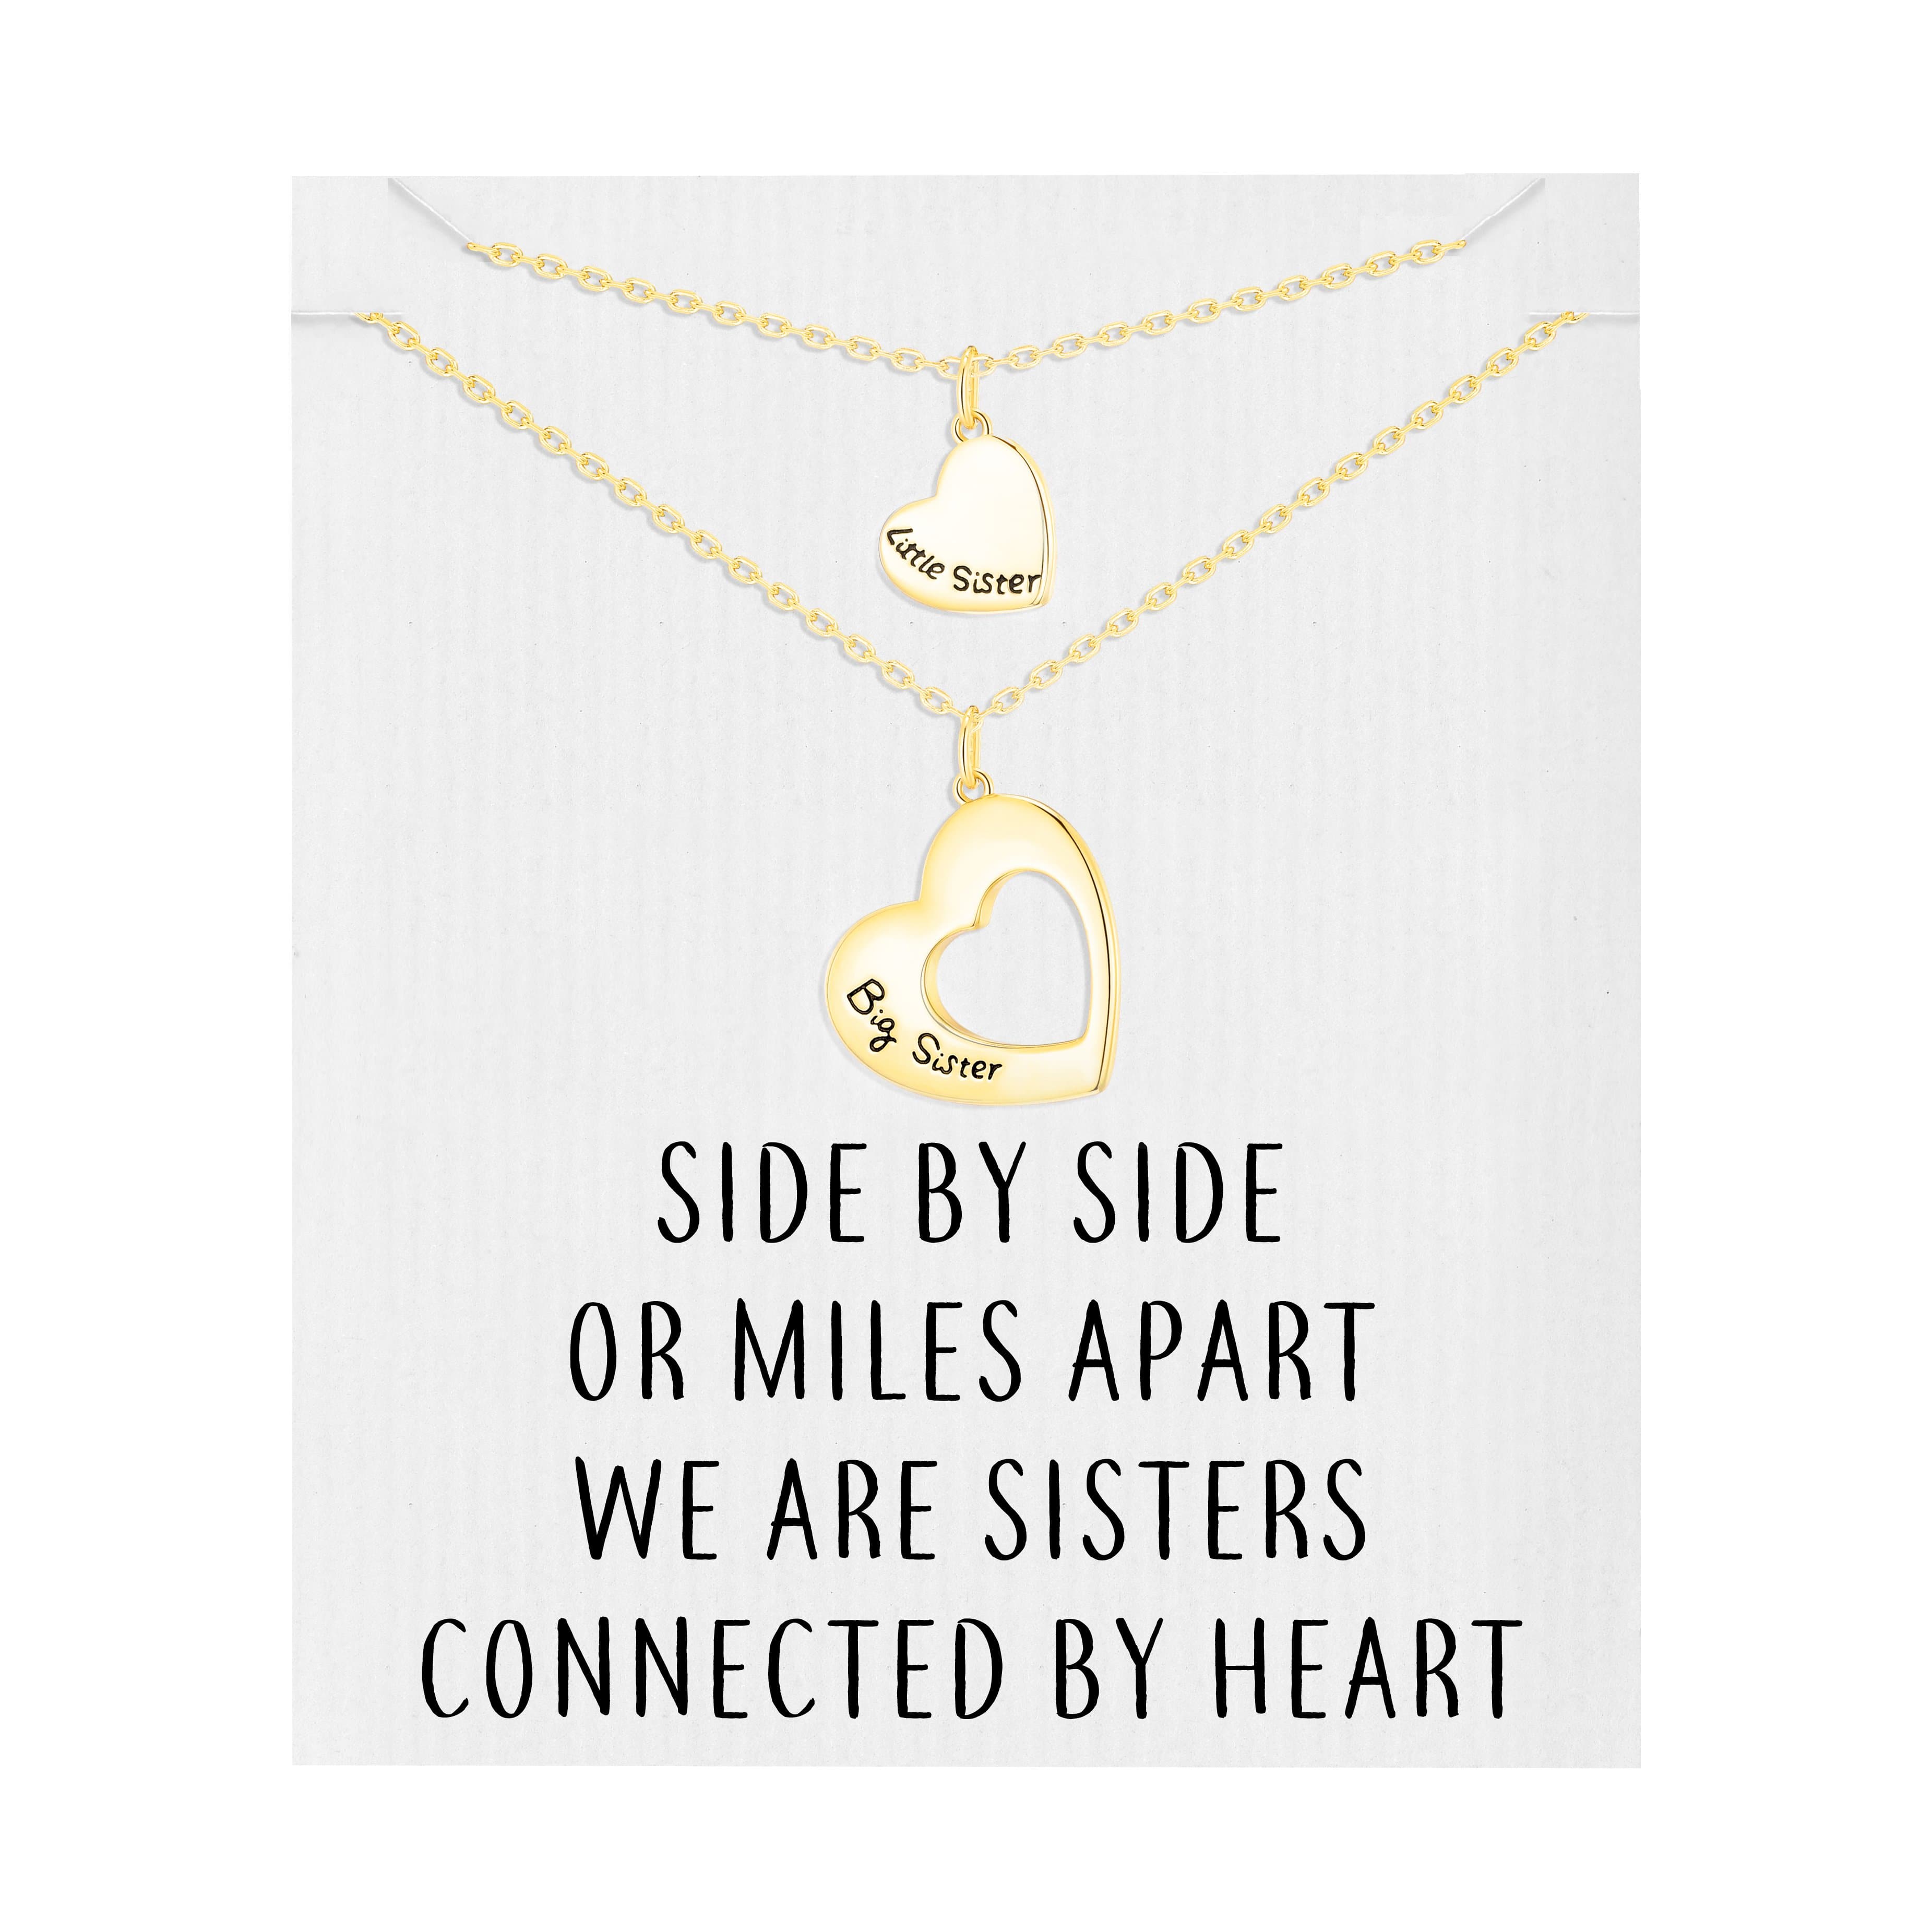 Gold Plated Big Sister and Little Sister Necklace Set with Quote Card by Philip Jones Jewellery